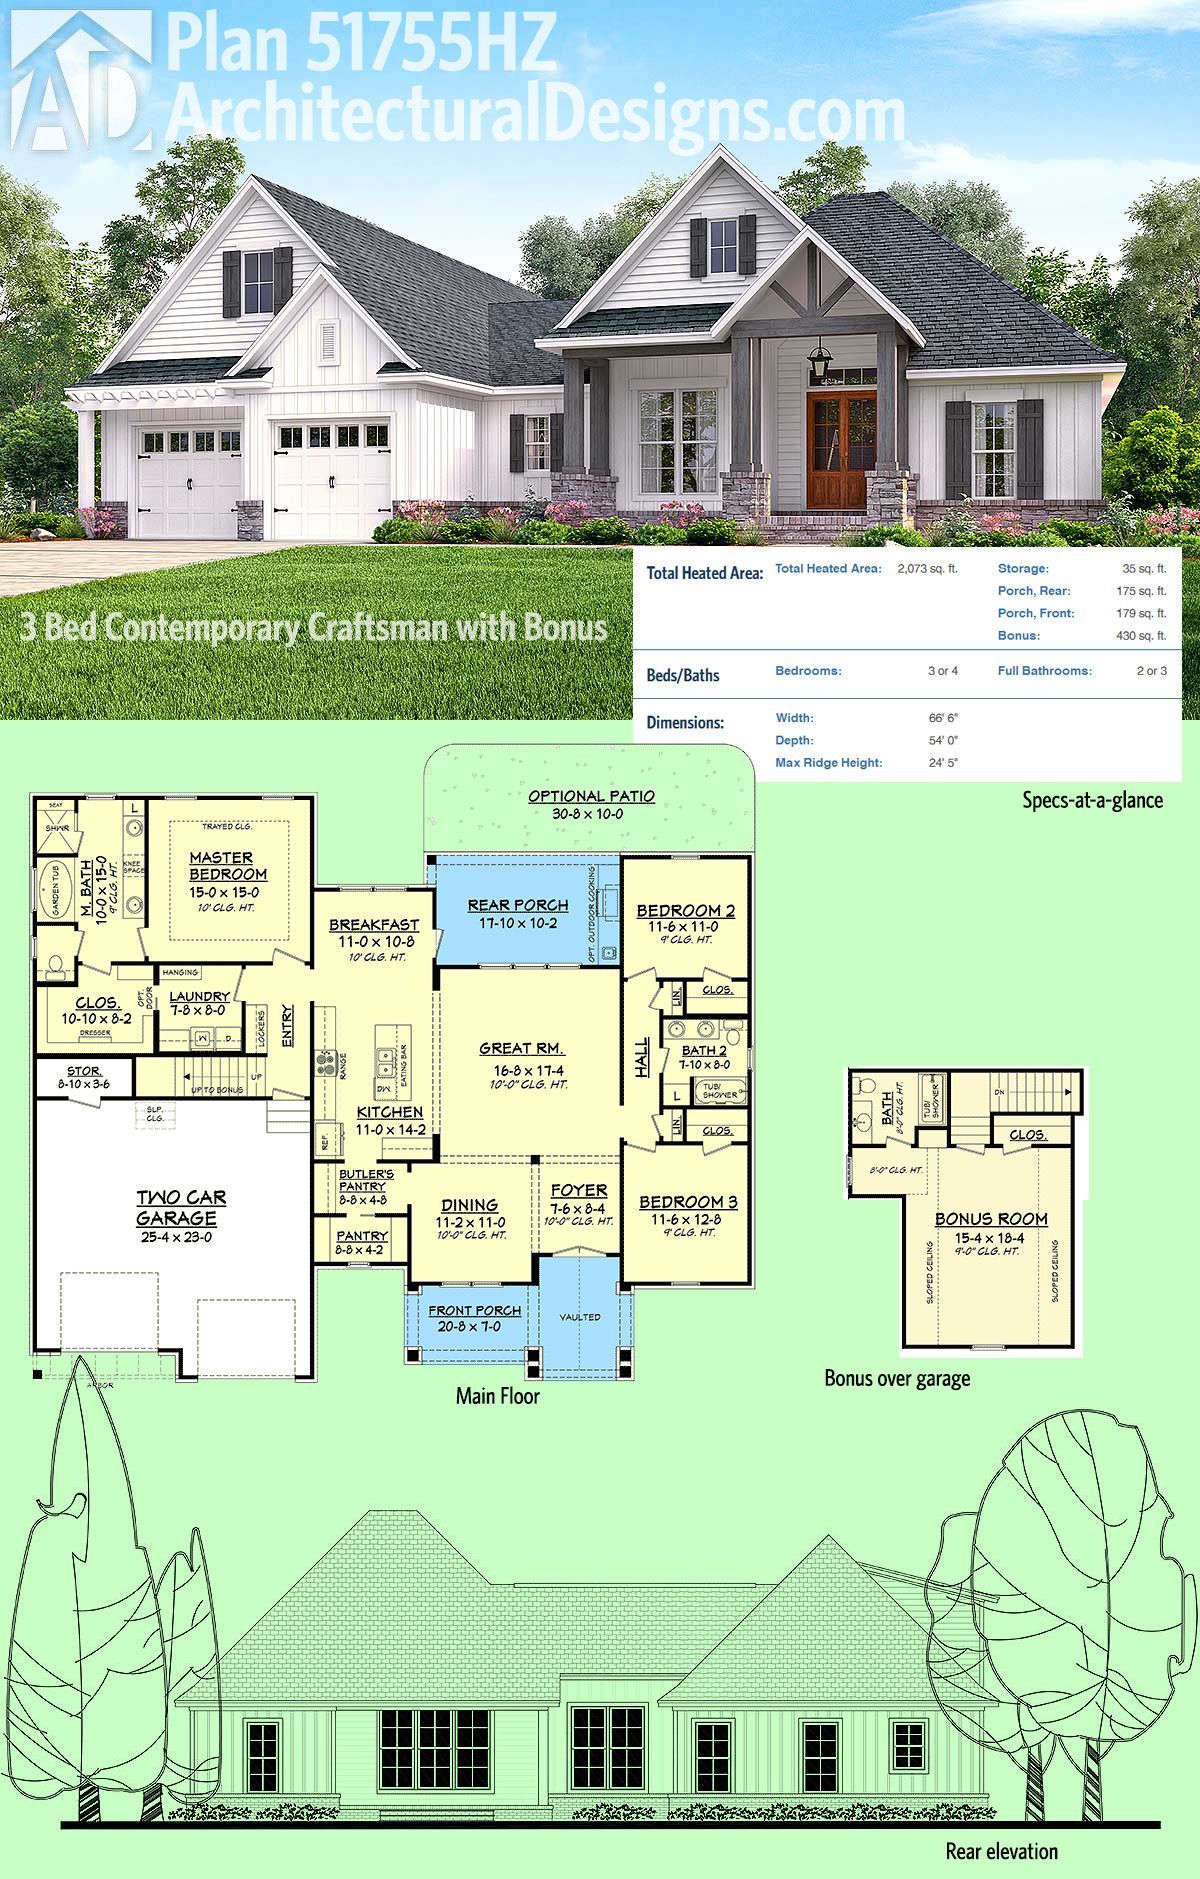 Architectural Designs House Plan 51755HZ is a 3 bed contemporary Craftsman design with a bonus room with bath over the garage,